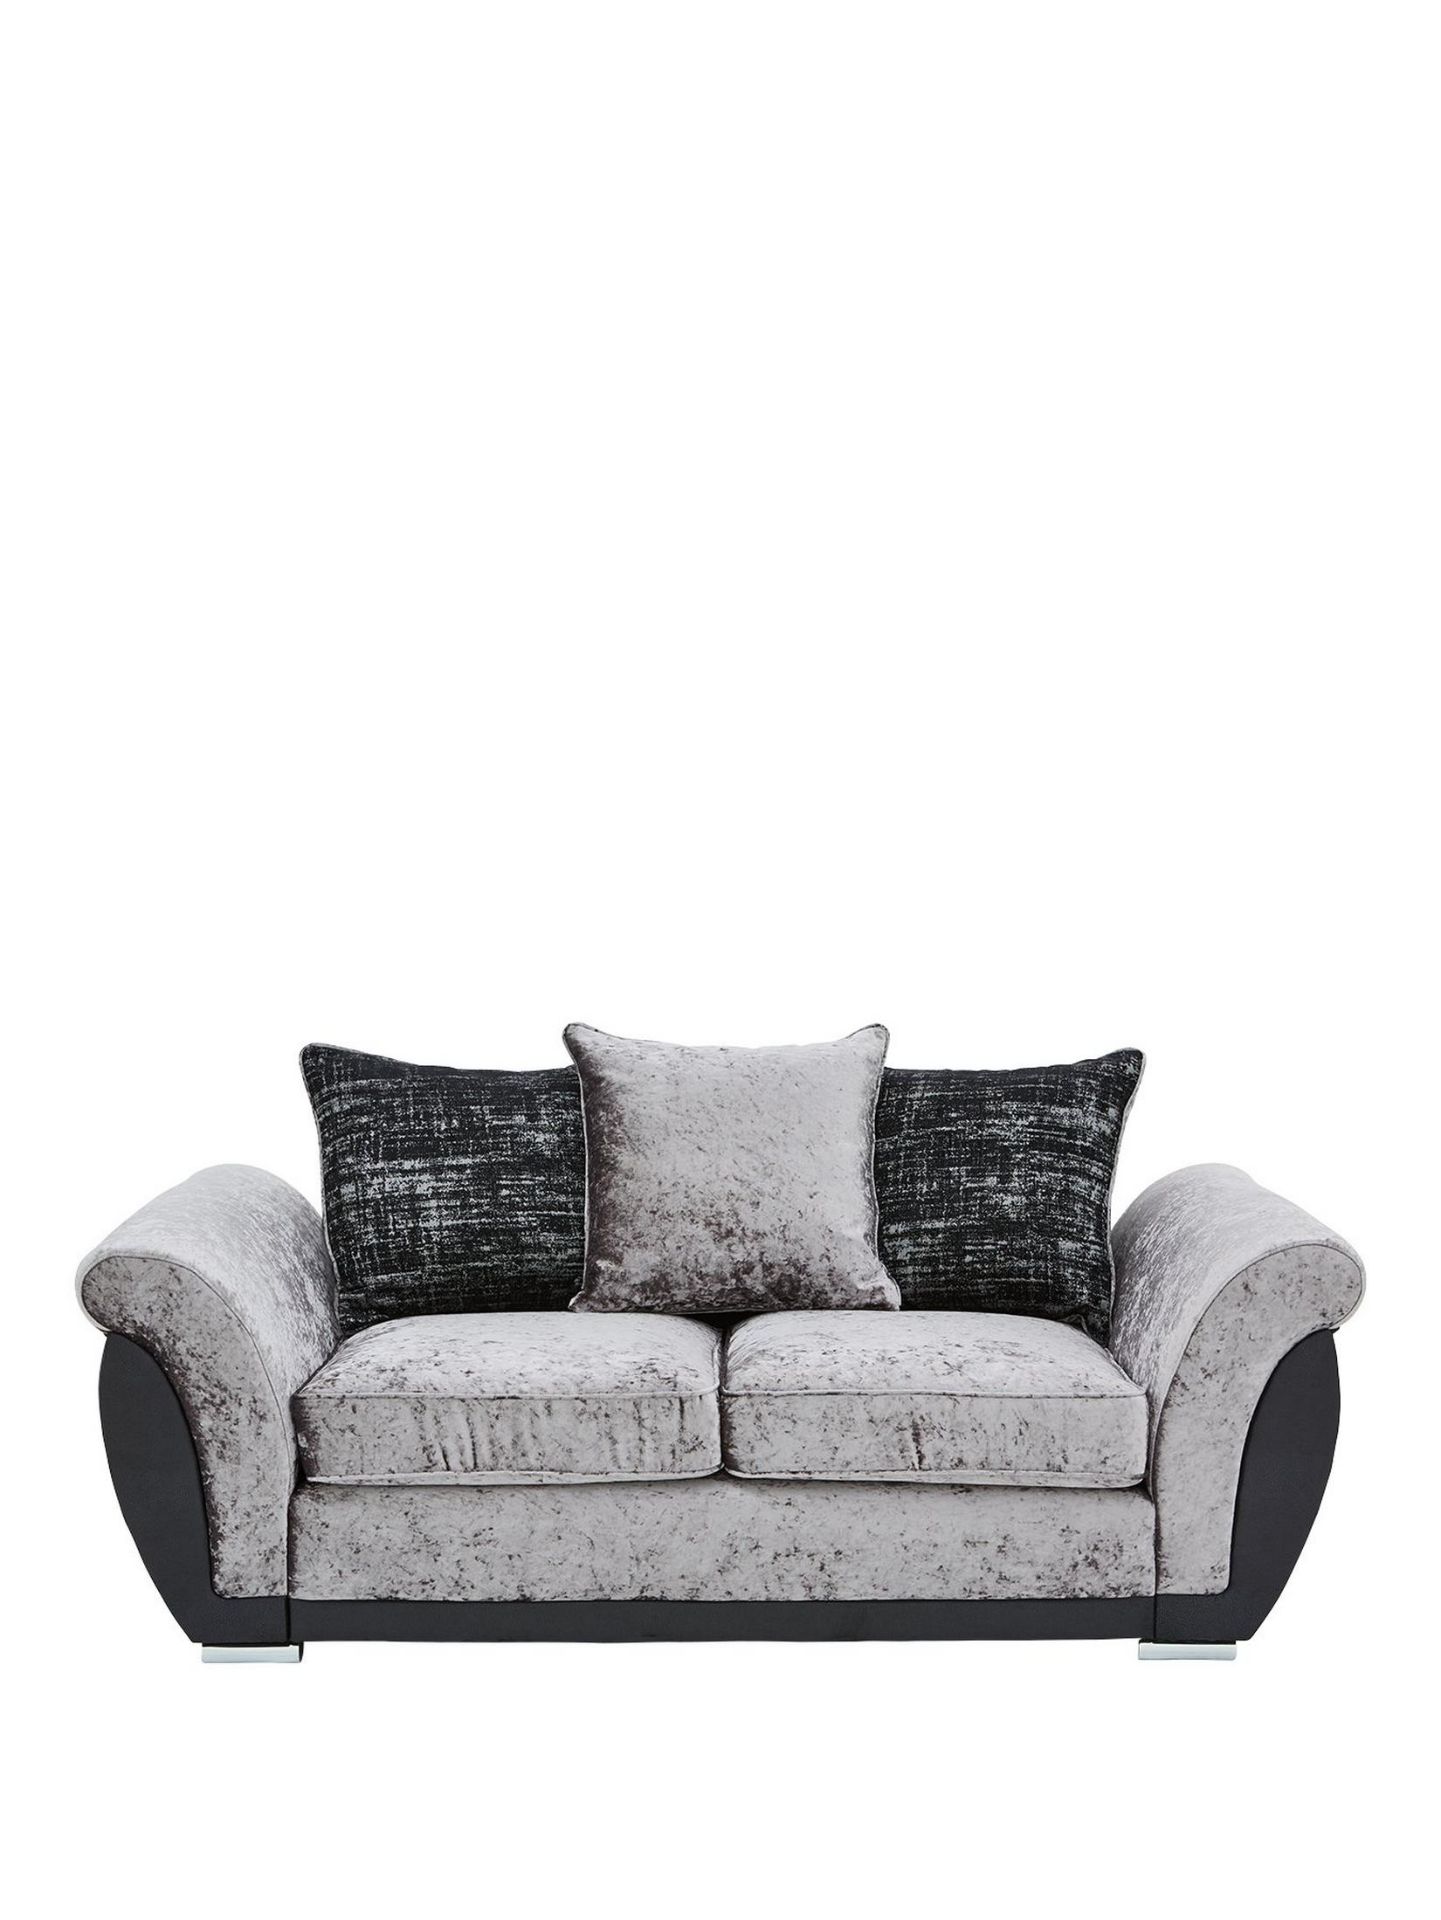 Alexa 2 Seater Sofa. RPP £589.00 . H 93 x W 192 x D 95 cm A trio of textures The supple faux leather - Image 2 of 3